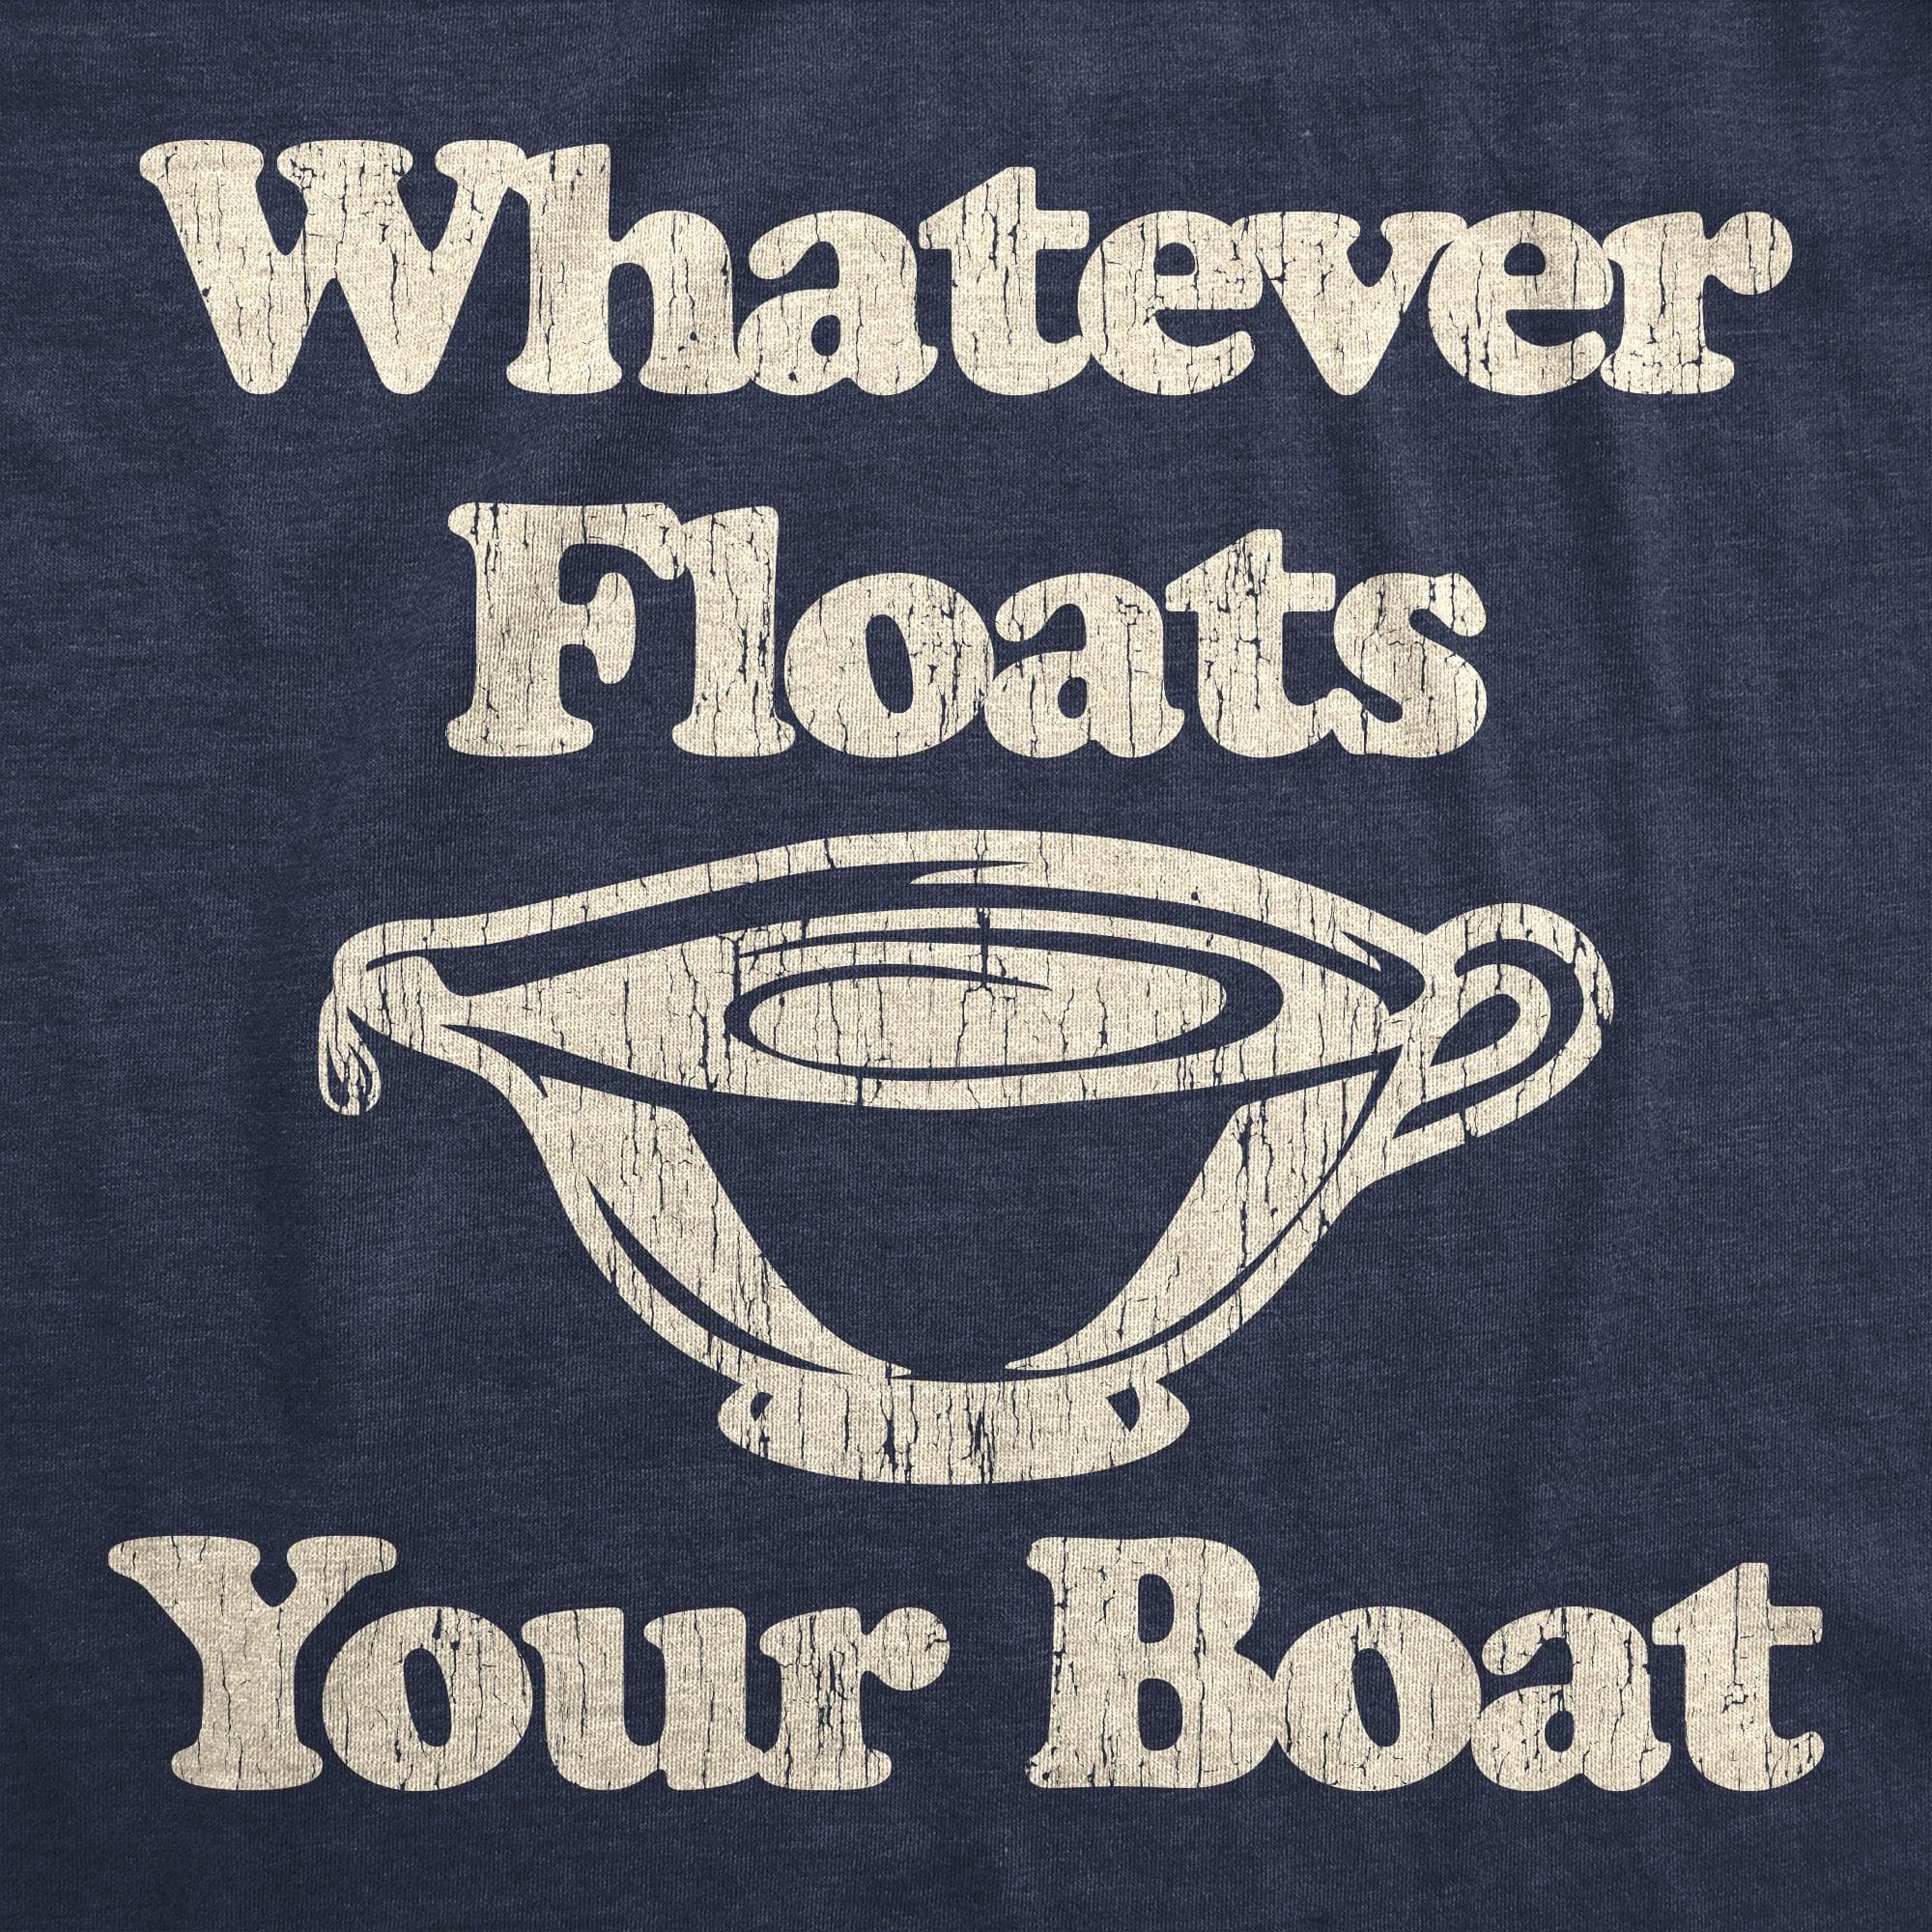 Whatever Floats Your Boat Men's Tshirt  -  Crazy Dog T-Shirts